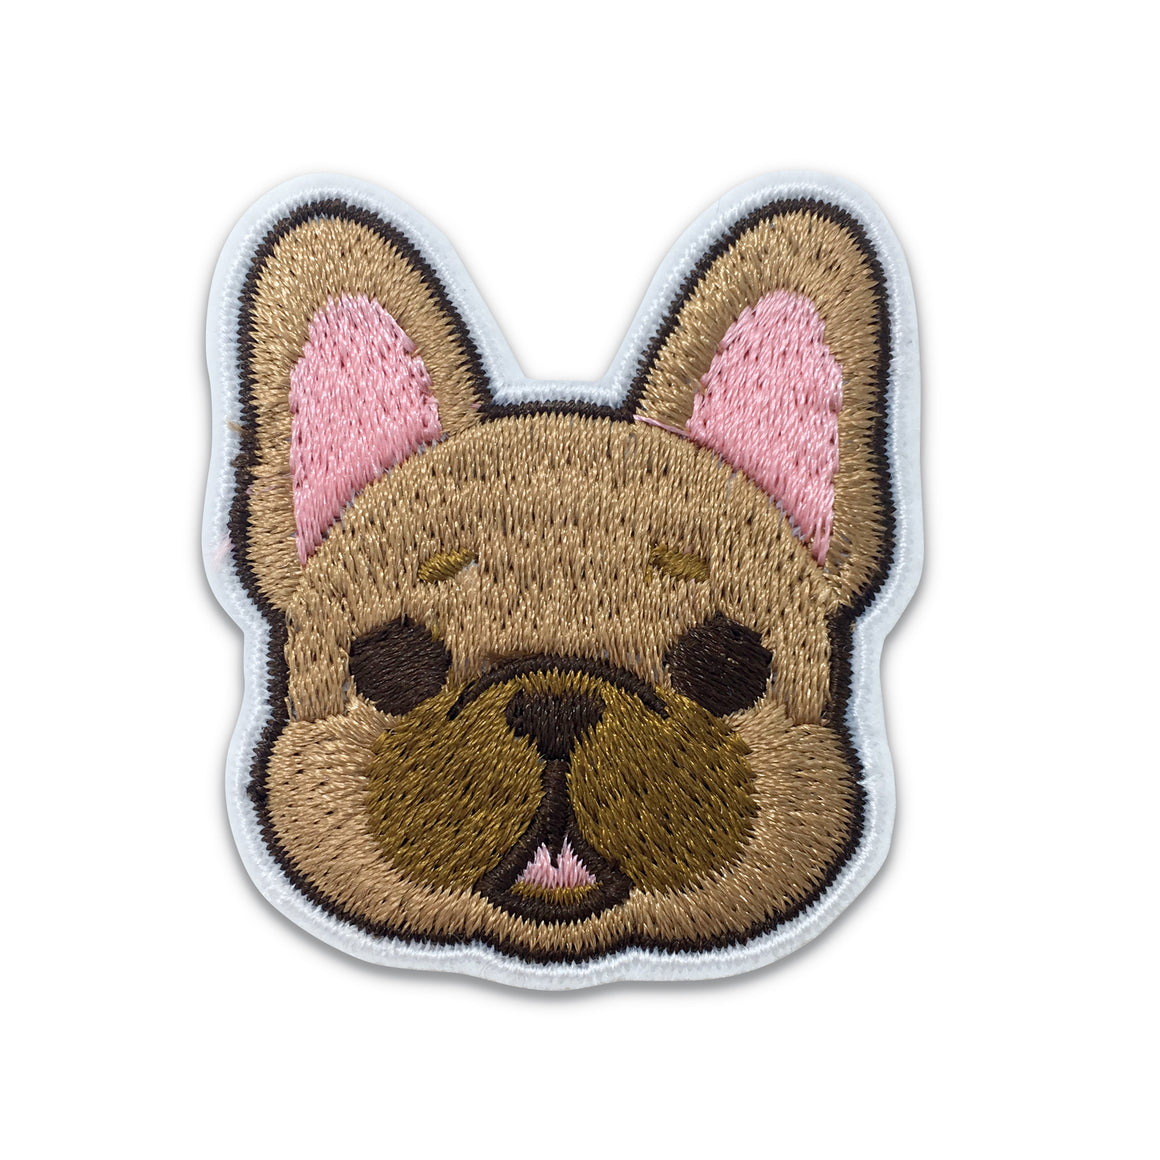 FRENCH BULLDOG IRON ON EMBROIDERED PATCH